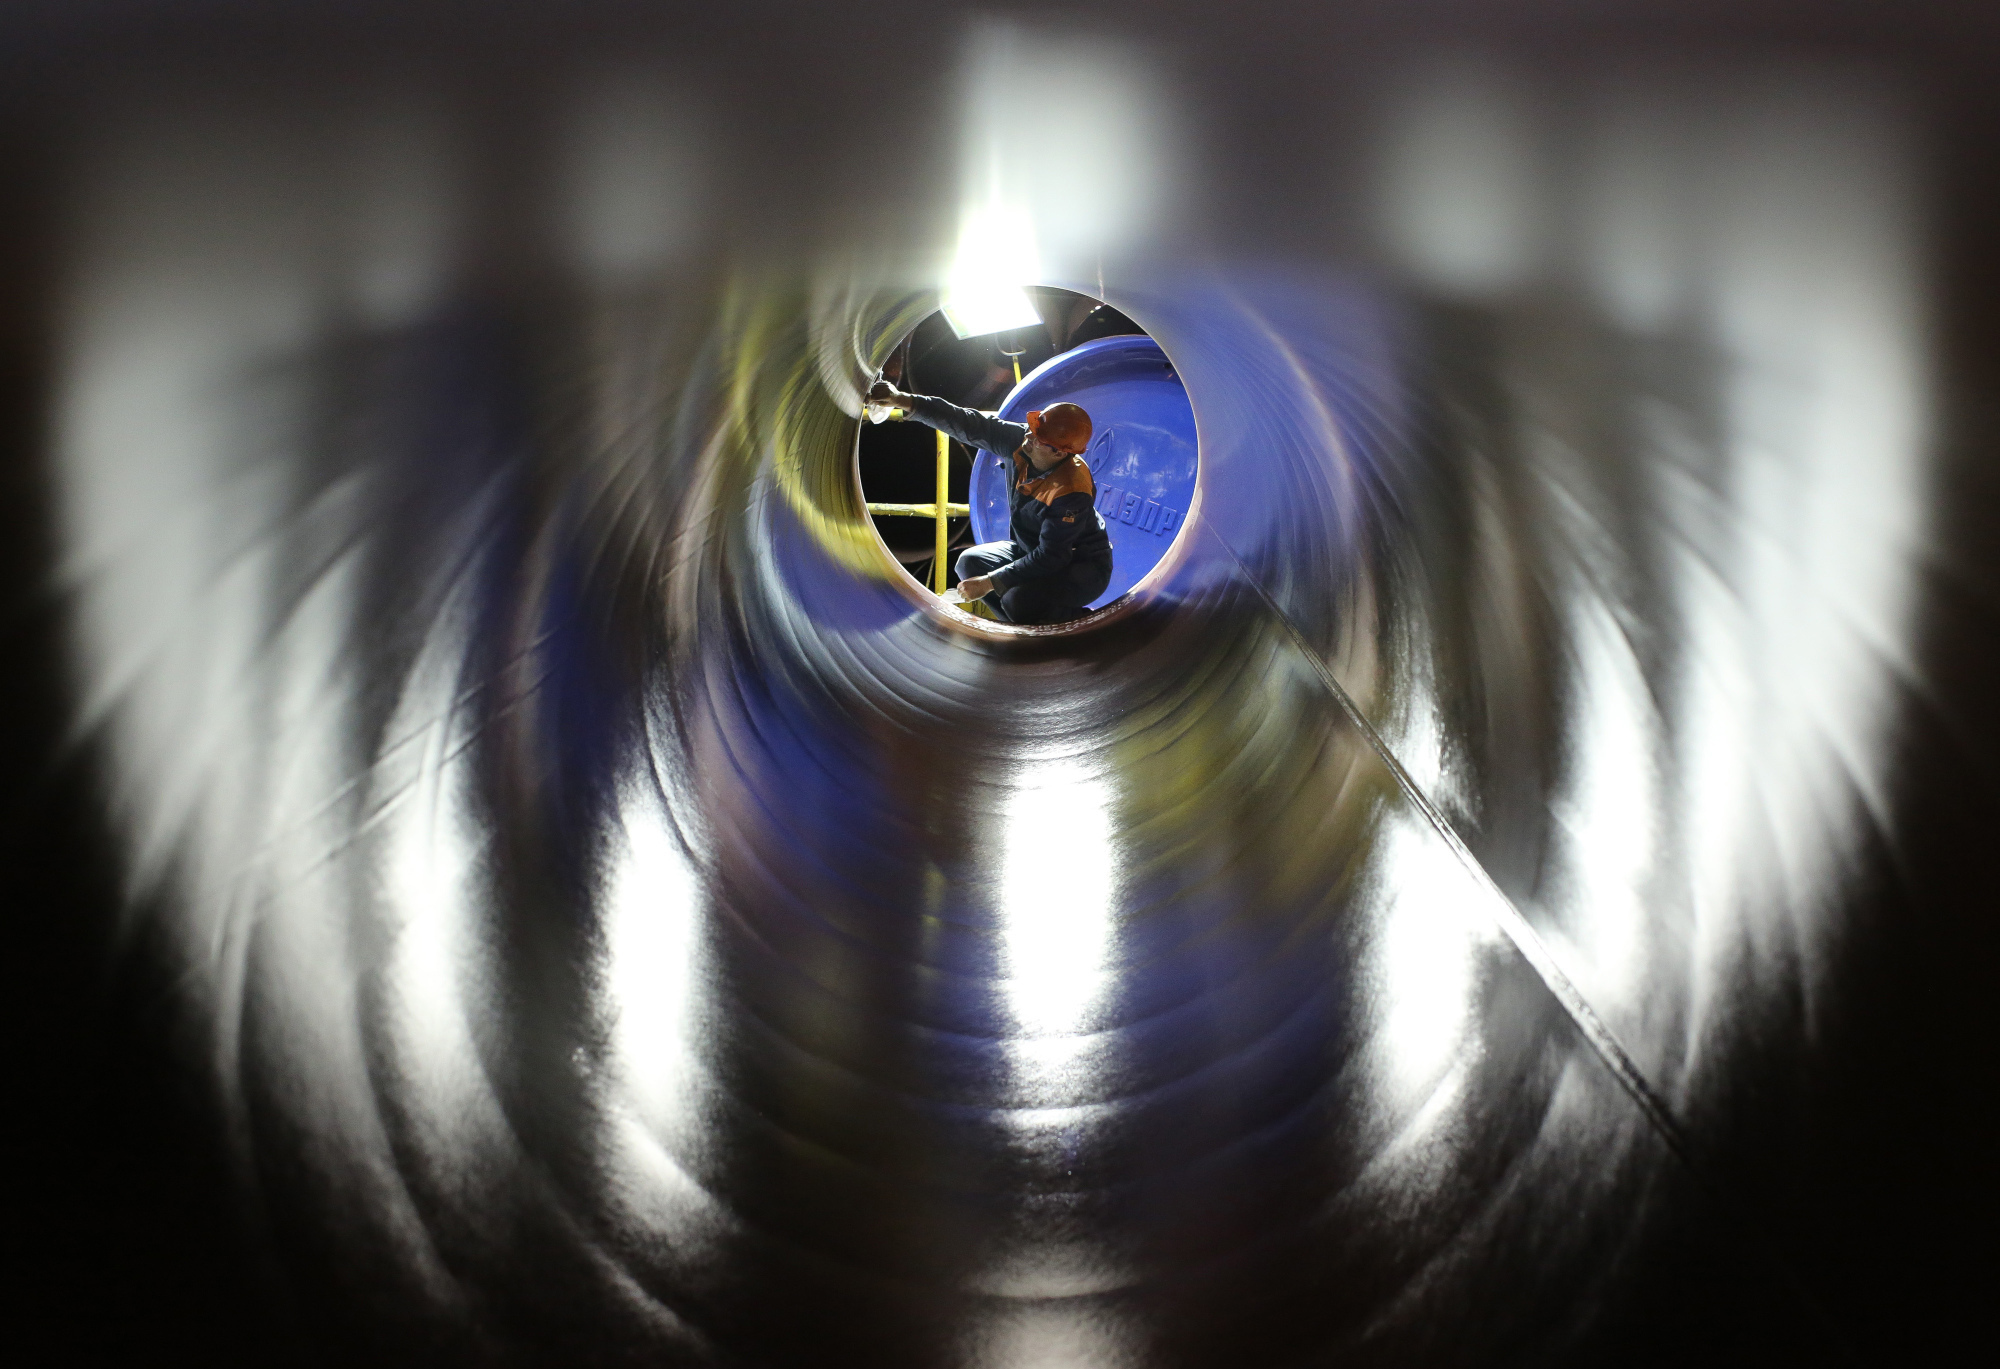 A worker checks the inside of a longitudinally welded large diameter steel pipe for use in oil and gas pipelines in a storage area at the Volzhsky Pipe Plant OJSC, operated by TMK PJSC, in Volzhsky, Russia, on March 30, 2017. Russian pipe producer TMK PJSC expects its U.S. business to recover as higher oil prices and President Donald Trumps trade and infrastructure policies boost demand. Photographer: Andrey Rudakov/Bloomberg